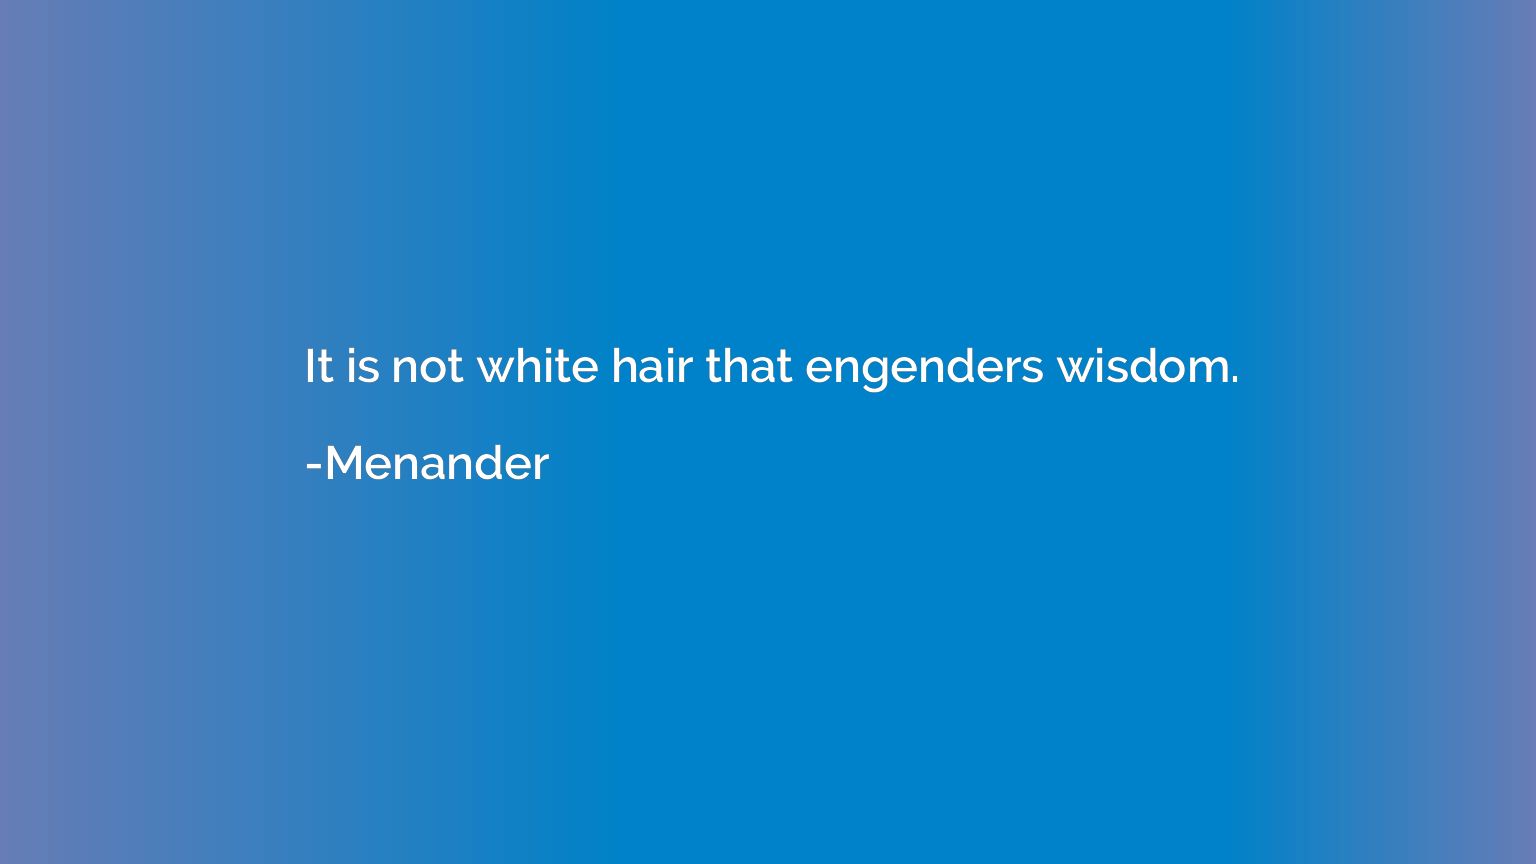 It is not white hair that engenders wisdom.